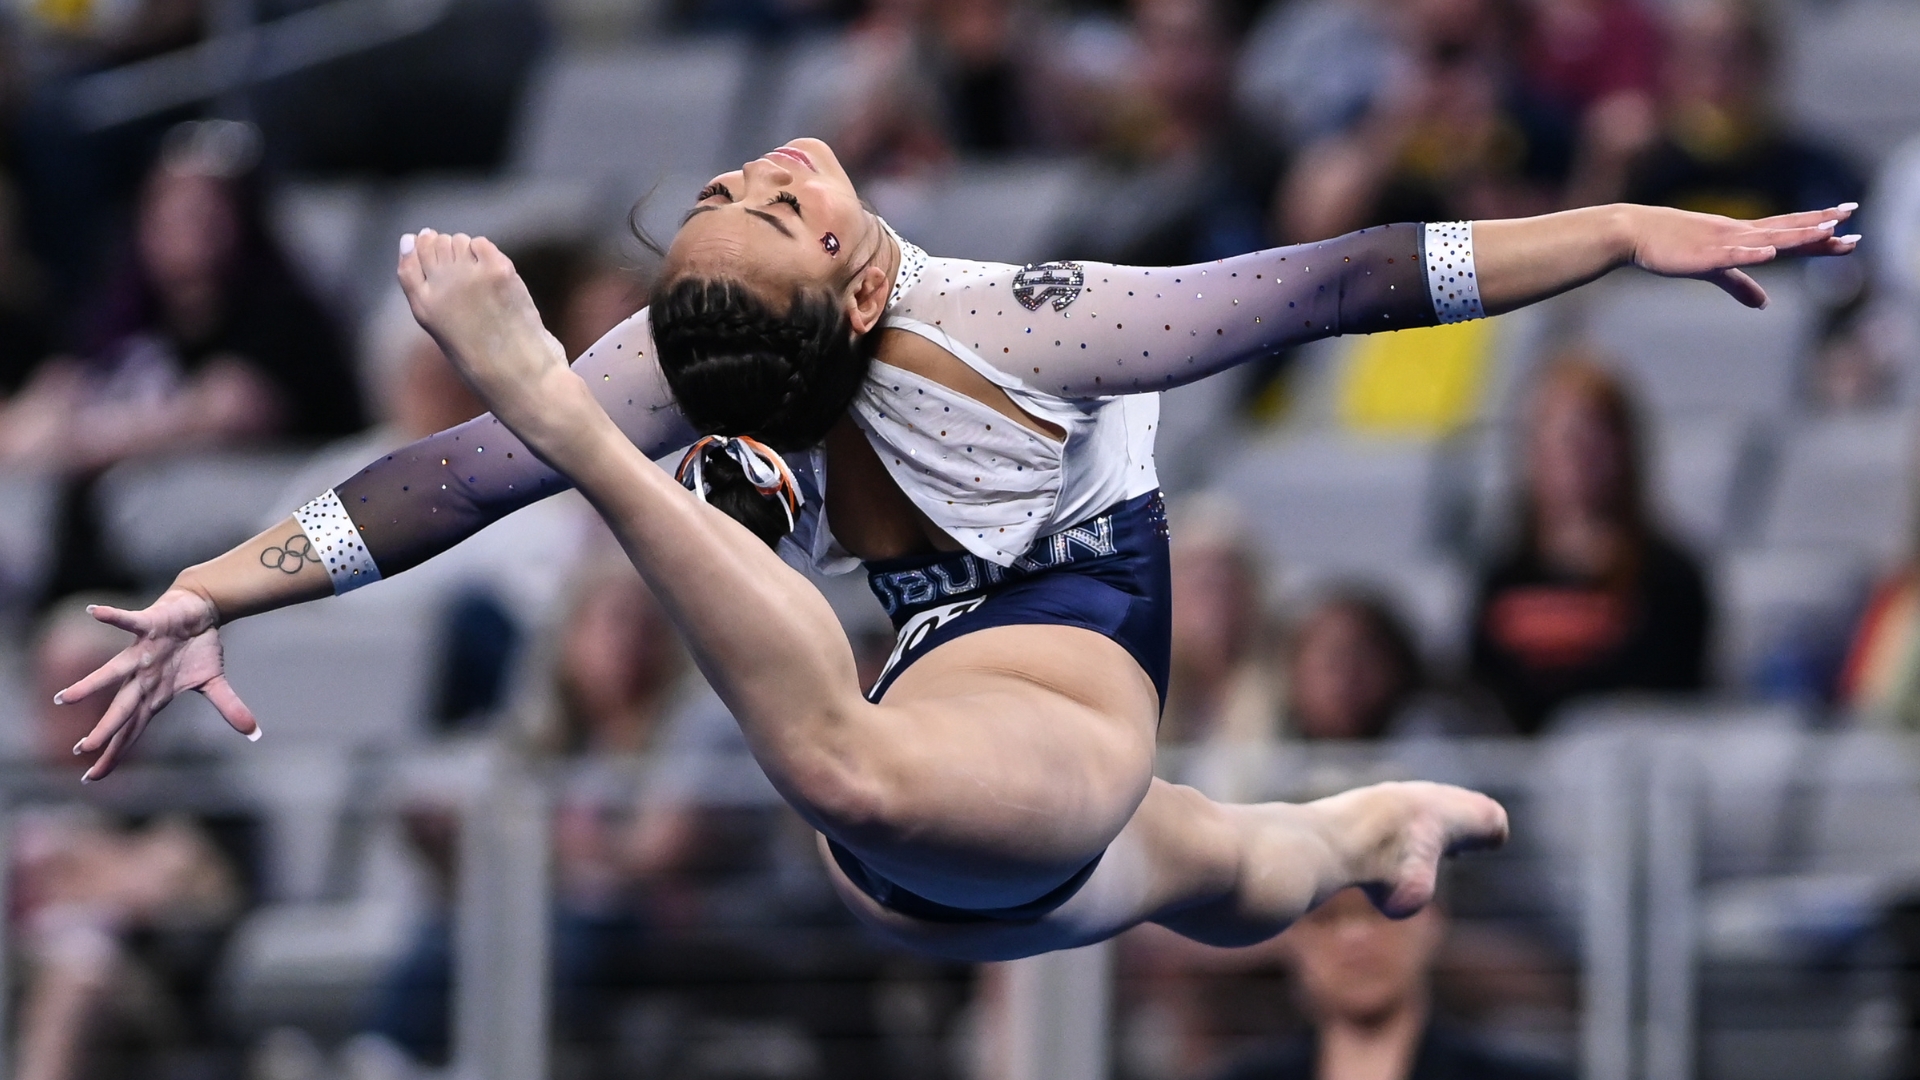 Auburn's Suni Lee performs on floor during the semifinals of the 2022 NCAA Women's Gymnastics Championships.